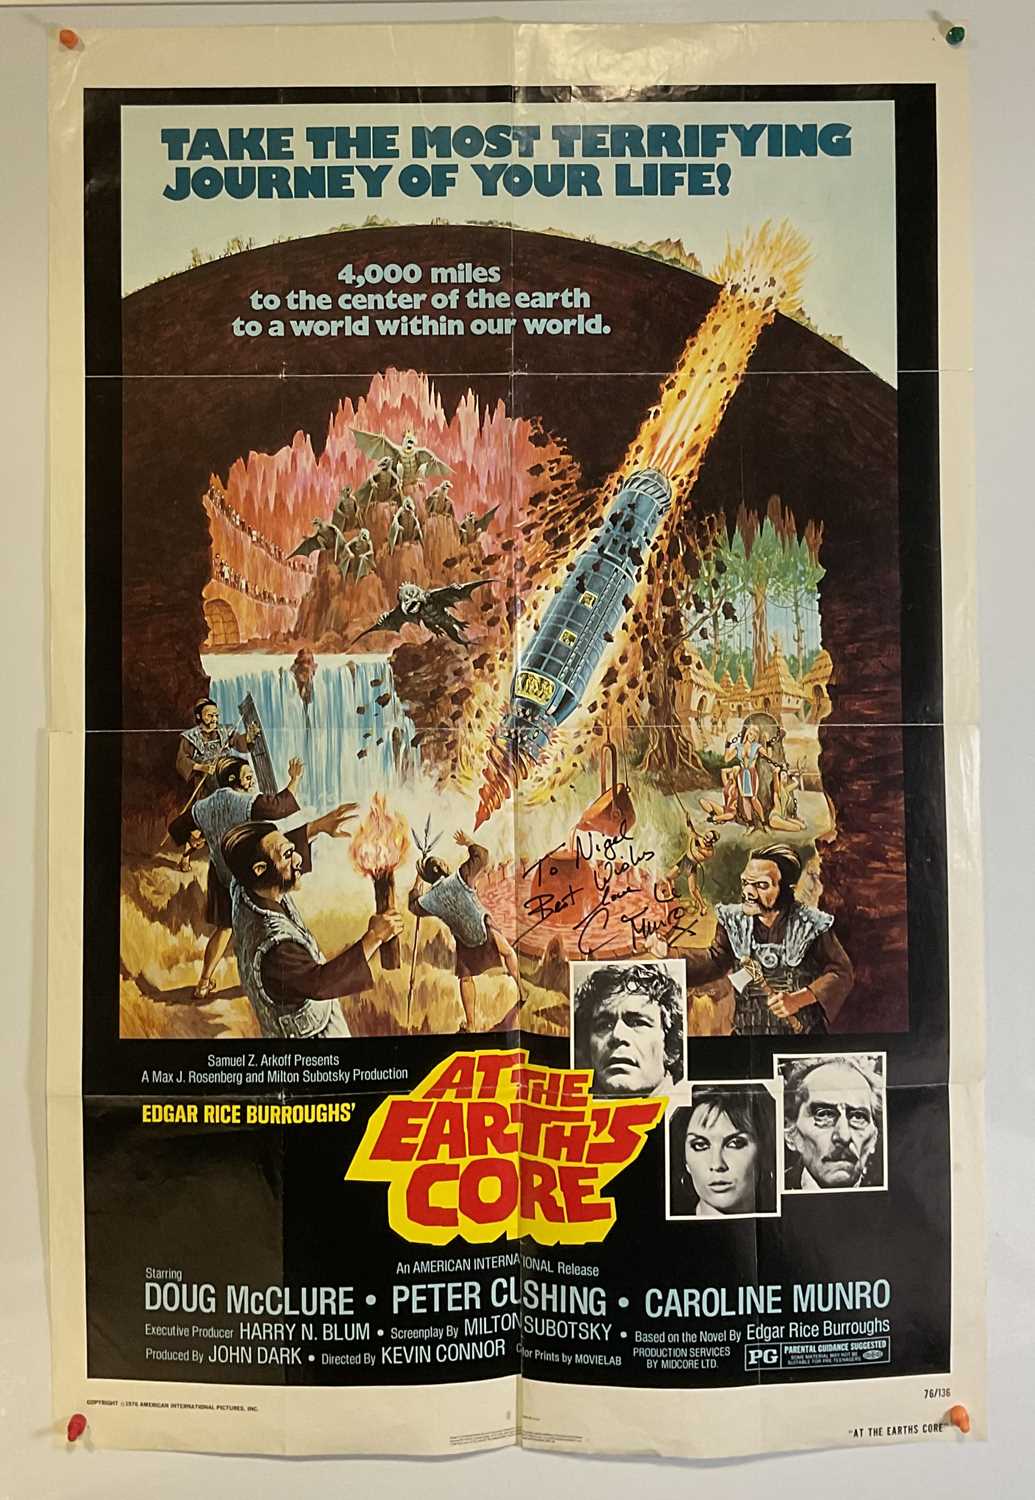 AT THE EARTHS CORE (1976) US one sheet film poster, signed by actress Caroline Munro, artwork by